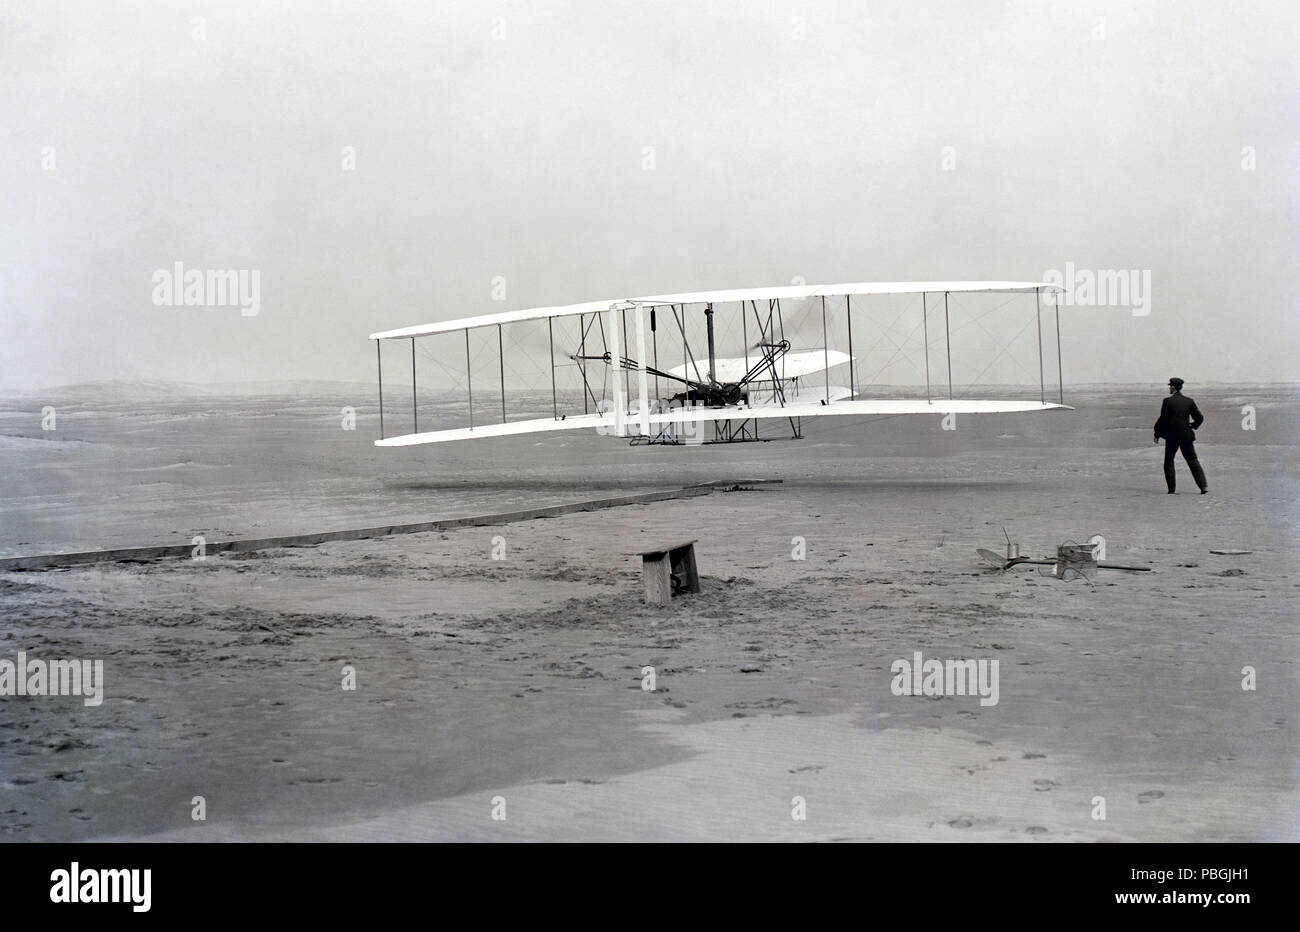 On December 17, 1903, at 10:30am at Kitty Hawk, North Carolina, this airplane arose for a few seconds to make the first powered, heavier-than-air controlled flight in history. The first flight lasted 12 seconds and flew a distance of 120 feet. Orville Wright piloted the historic flight while his brother, Wilbur, observed. The brothers took three other flights that day, each flight lasting longer than the other with the final flight going a distance of 852 feet in 59 seconds. This flight was the culmination of a number of years of research on gliders. Stock Photo